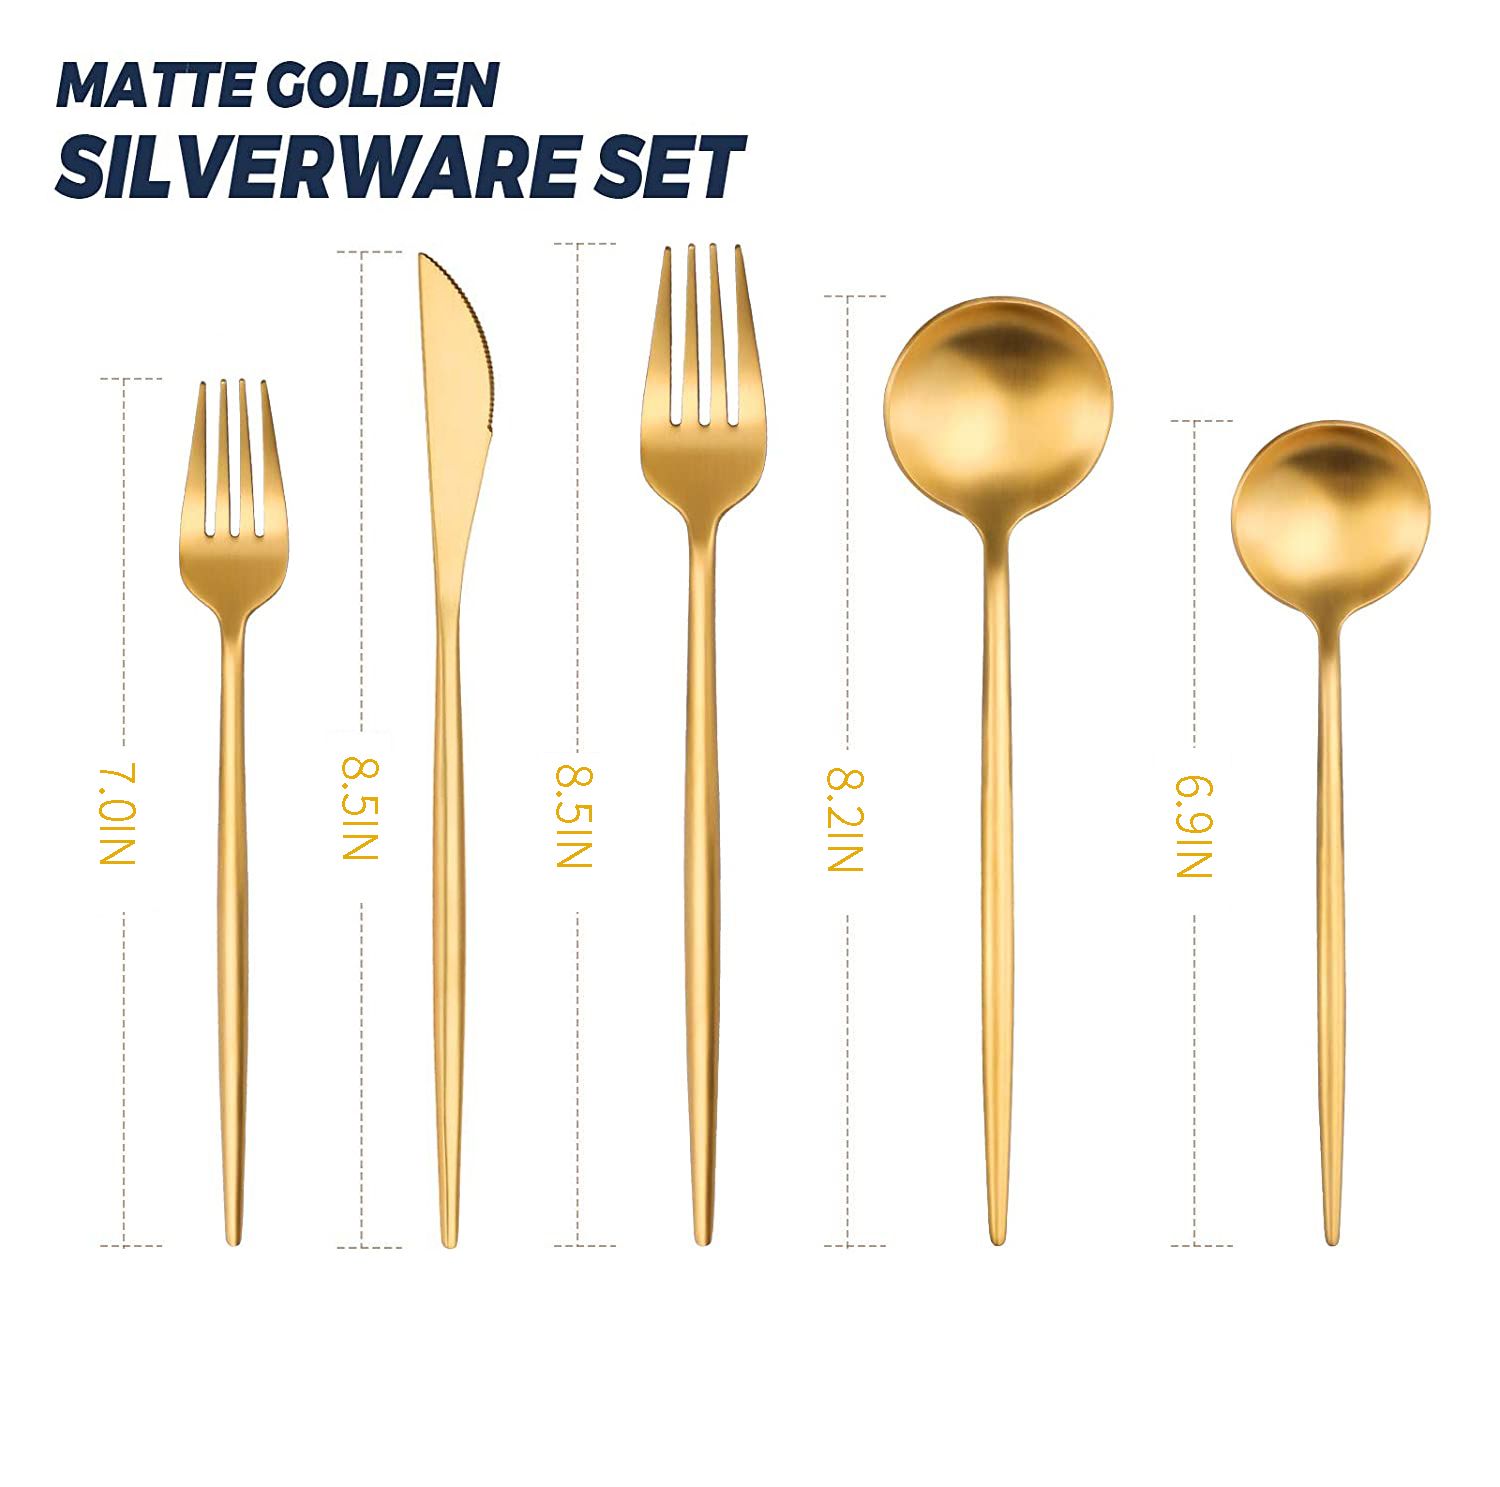 Giant Soup Spoons And Fork Gold Set Silverware Onieda Flatware Factory Manufacturer Supplier Bent Spoon